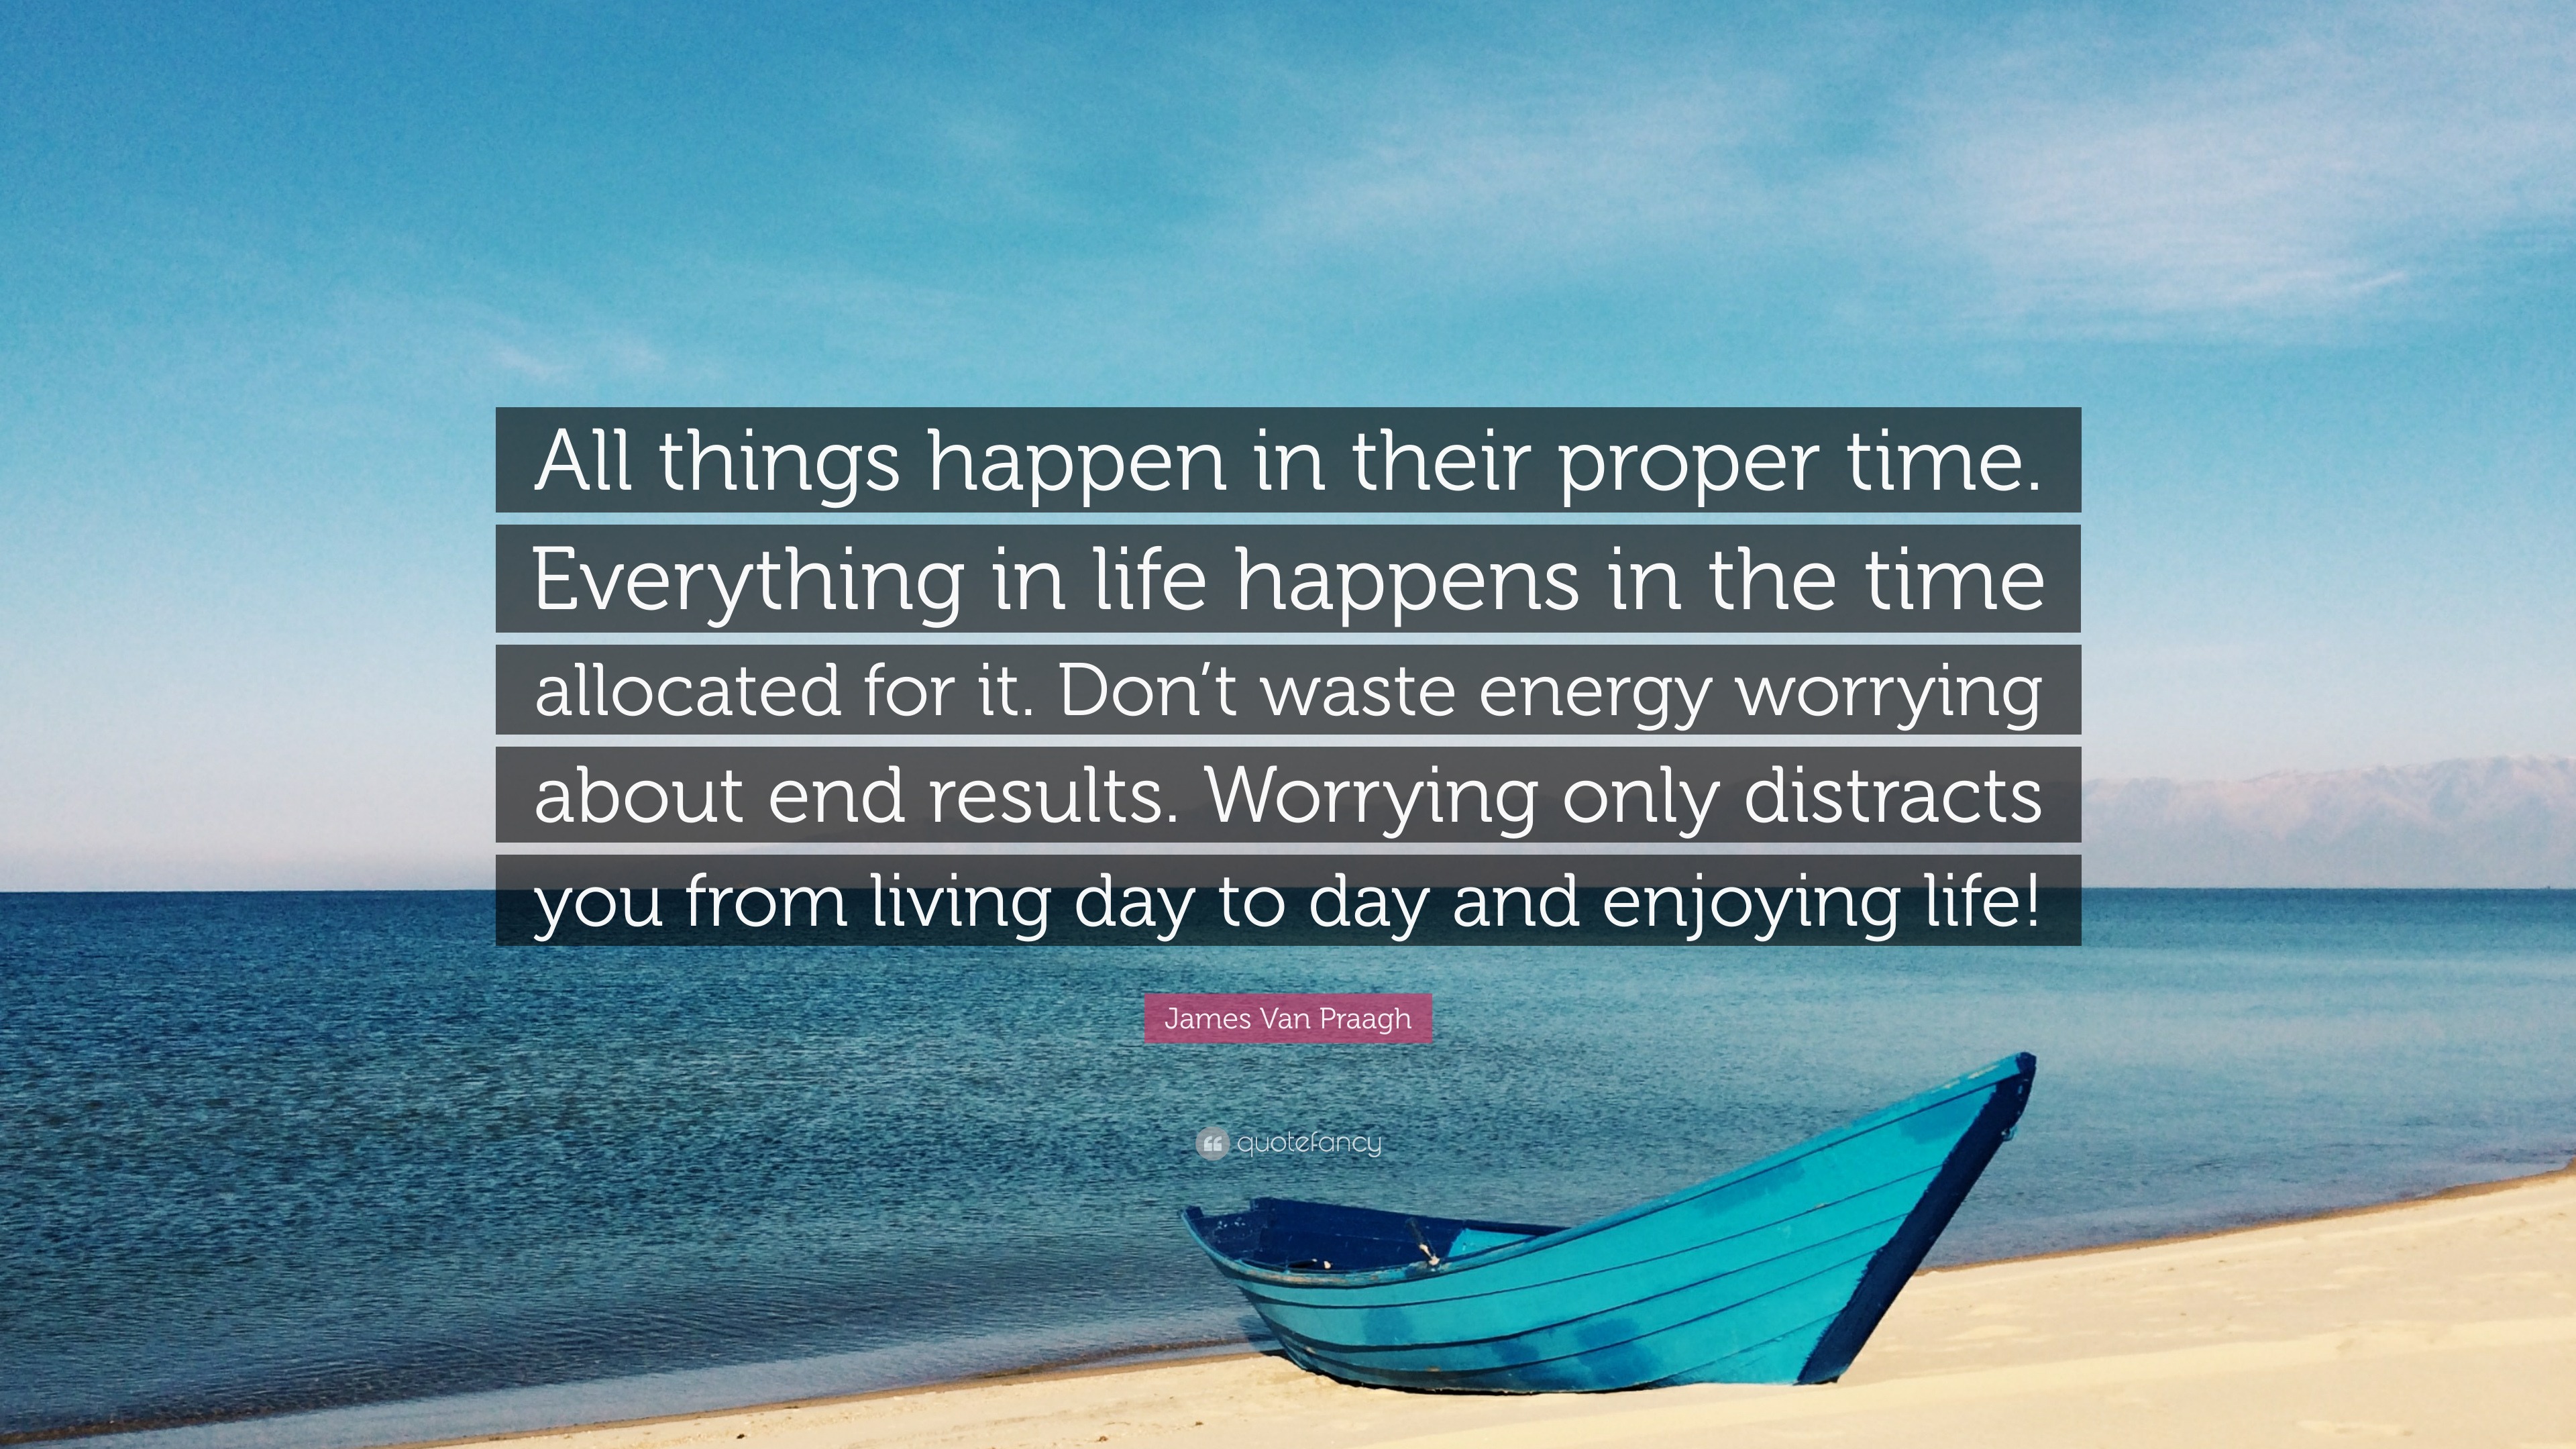 James Van Praagh Quote: “All things happen in proper time. Everything in life happens in the time allocated for it. Don't waste worr...”